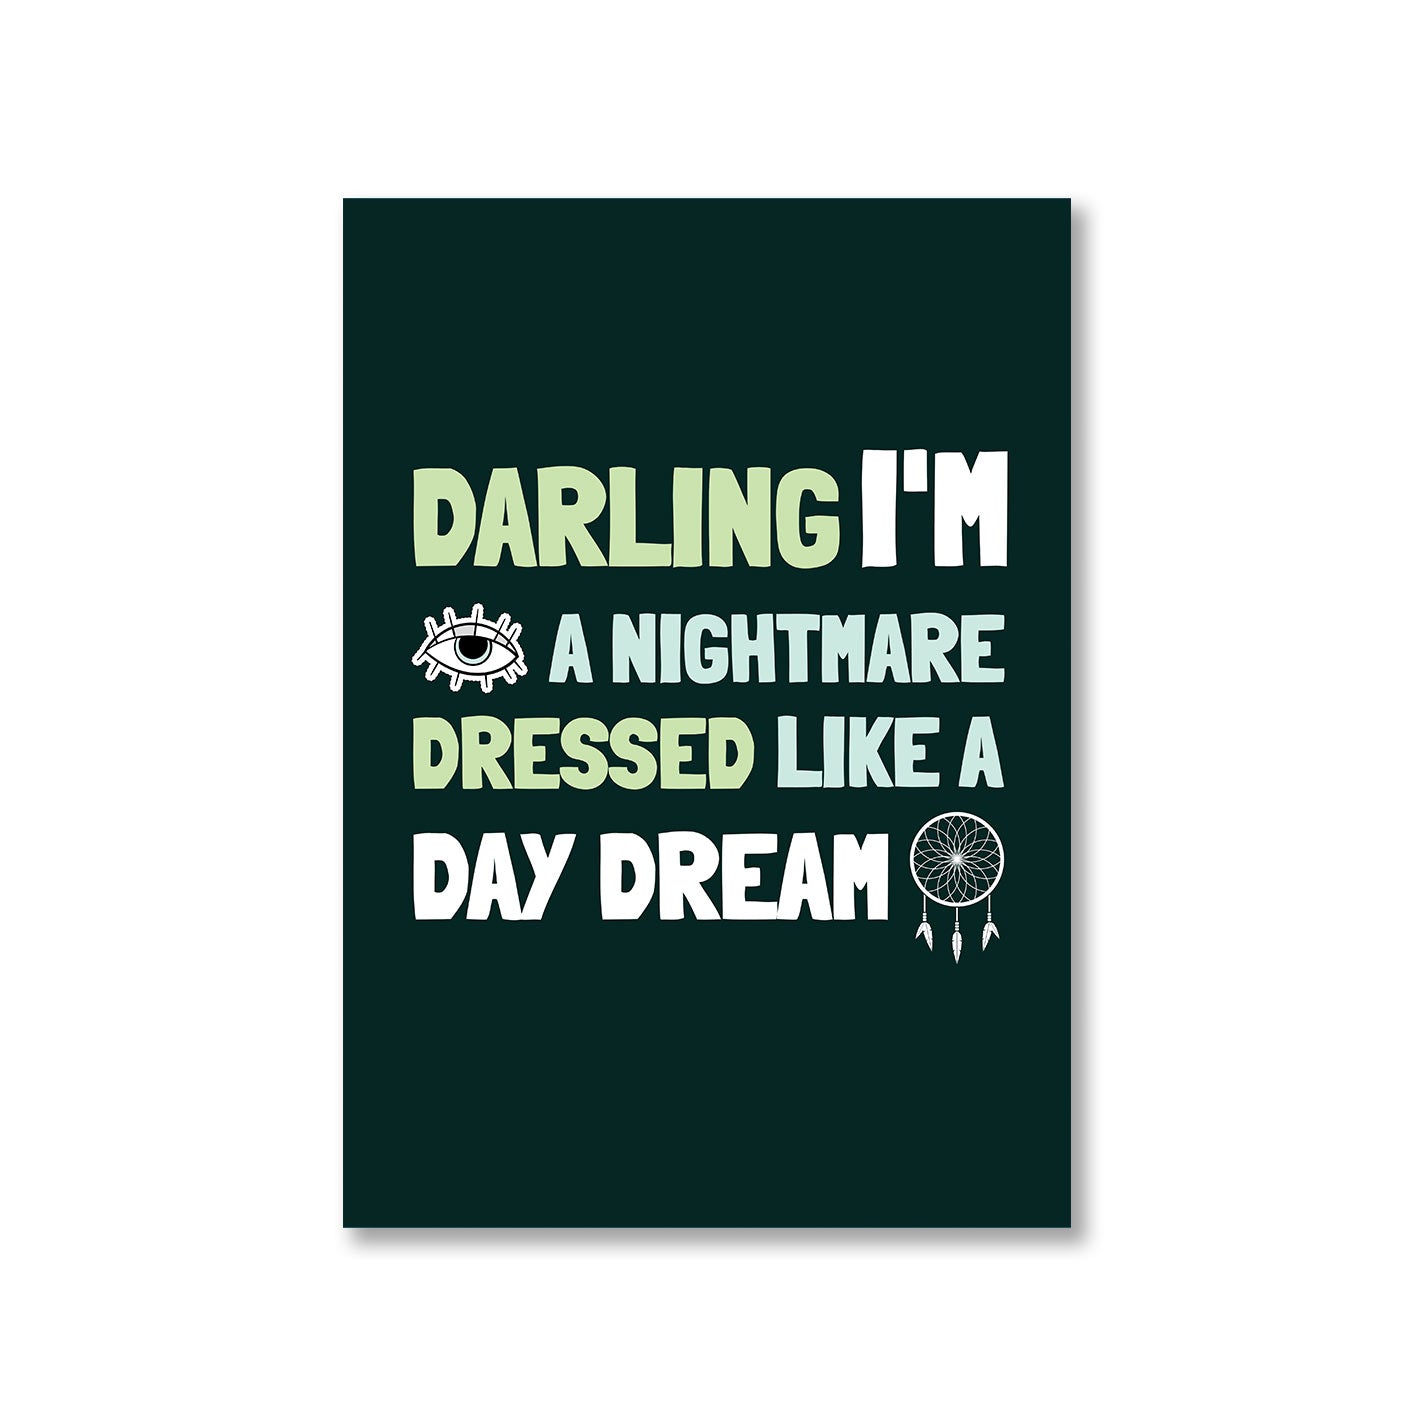 taylor swift blank space poster wall art buy online united states of america usa the banyan tee tbt a4 darling i'm a nightmare dressed like a daydream